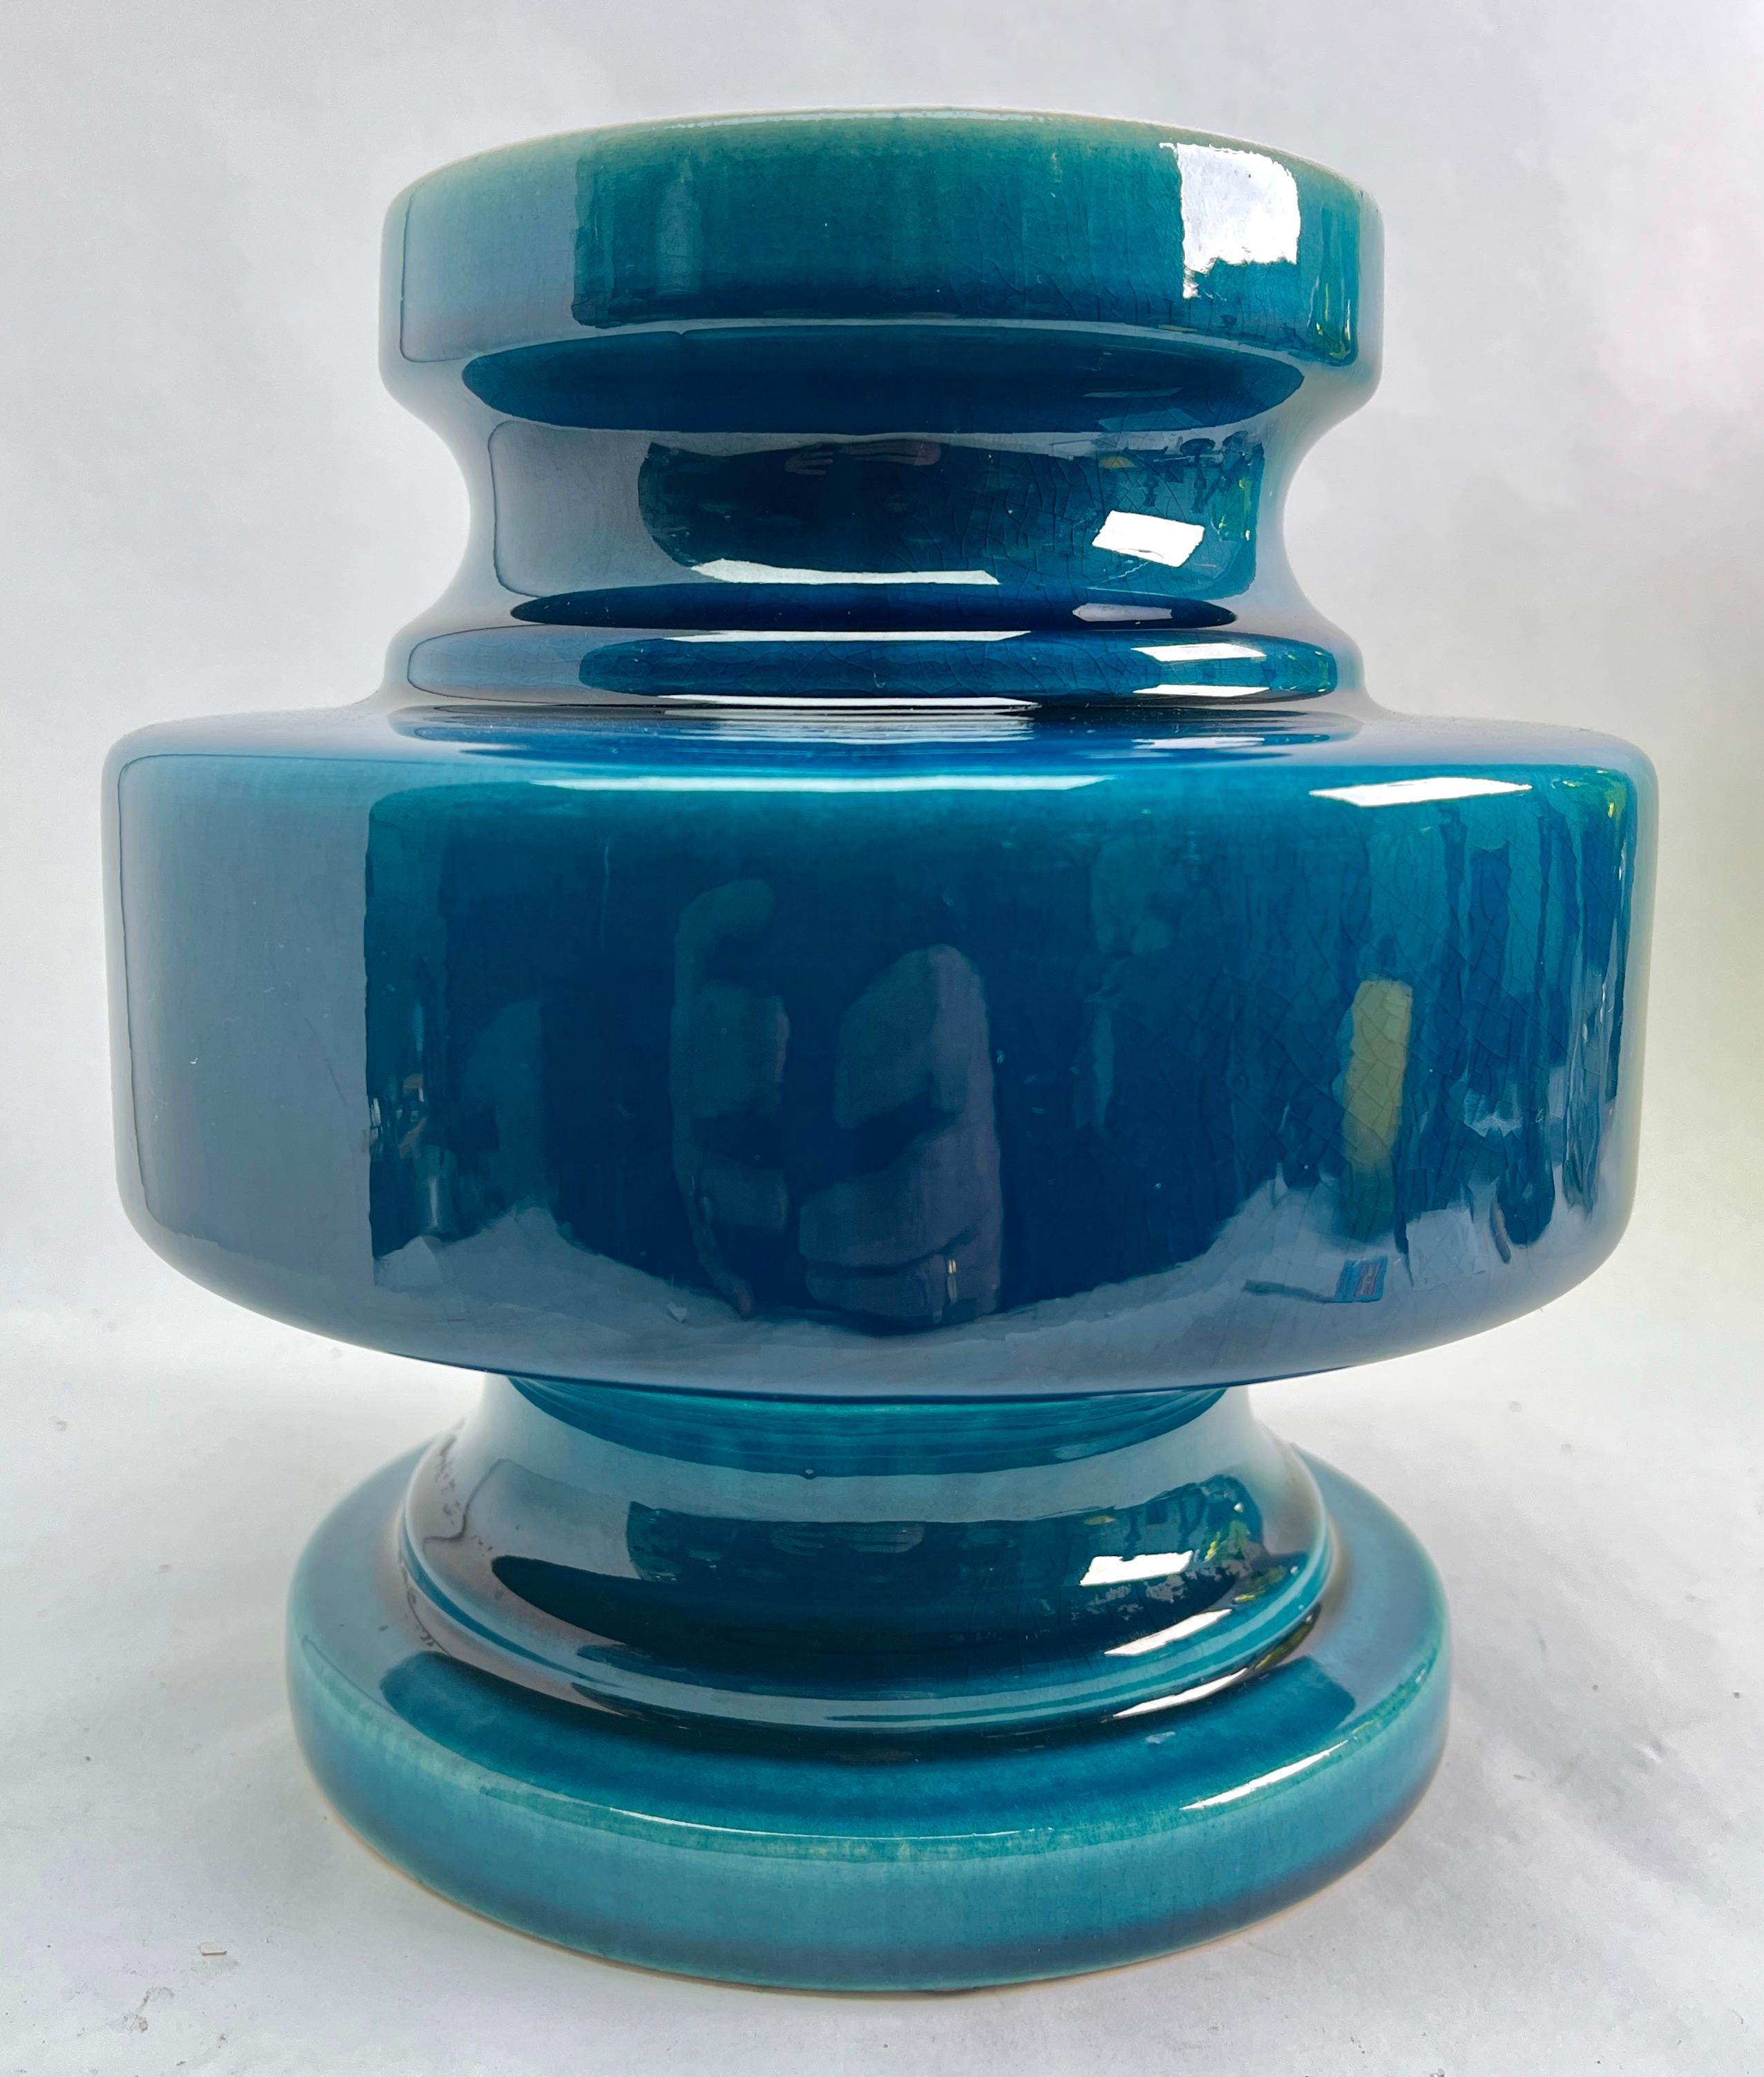 Inspired by a centuries-old technique of Chinese ceramics, this elegant vase is a bright and dramatic shade of turquoise with a fine crackle glaze. 

Photography fails to capture the simple elegance of this vase

